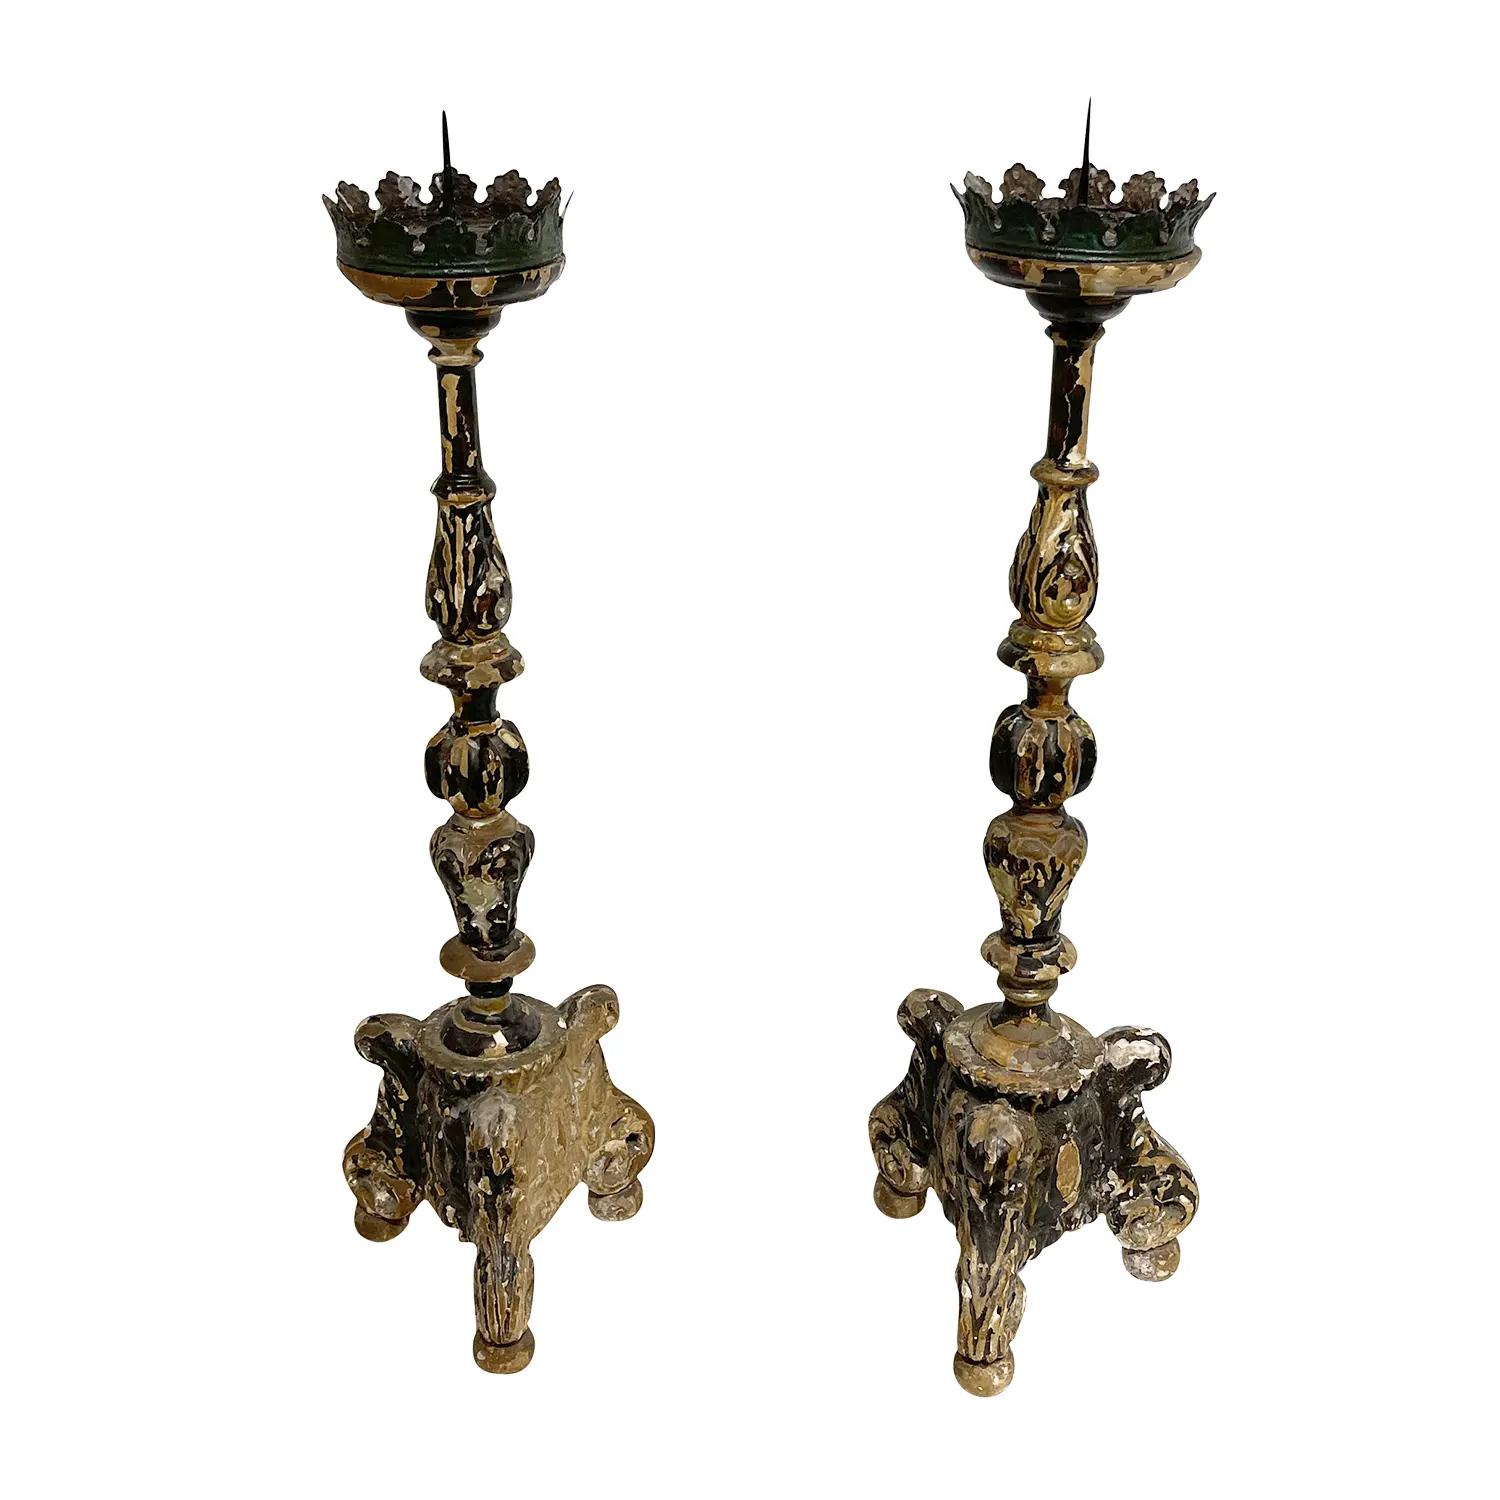 An antique German pair of altar candlesticks made of hand carved Wood, in good condition. The tall candle holders is composed with a slim, articulated shaft, metal drip catcher with ridged edges and a metal mandrel, supported by a three-pass base on